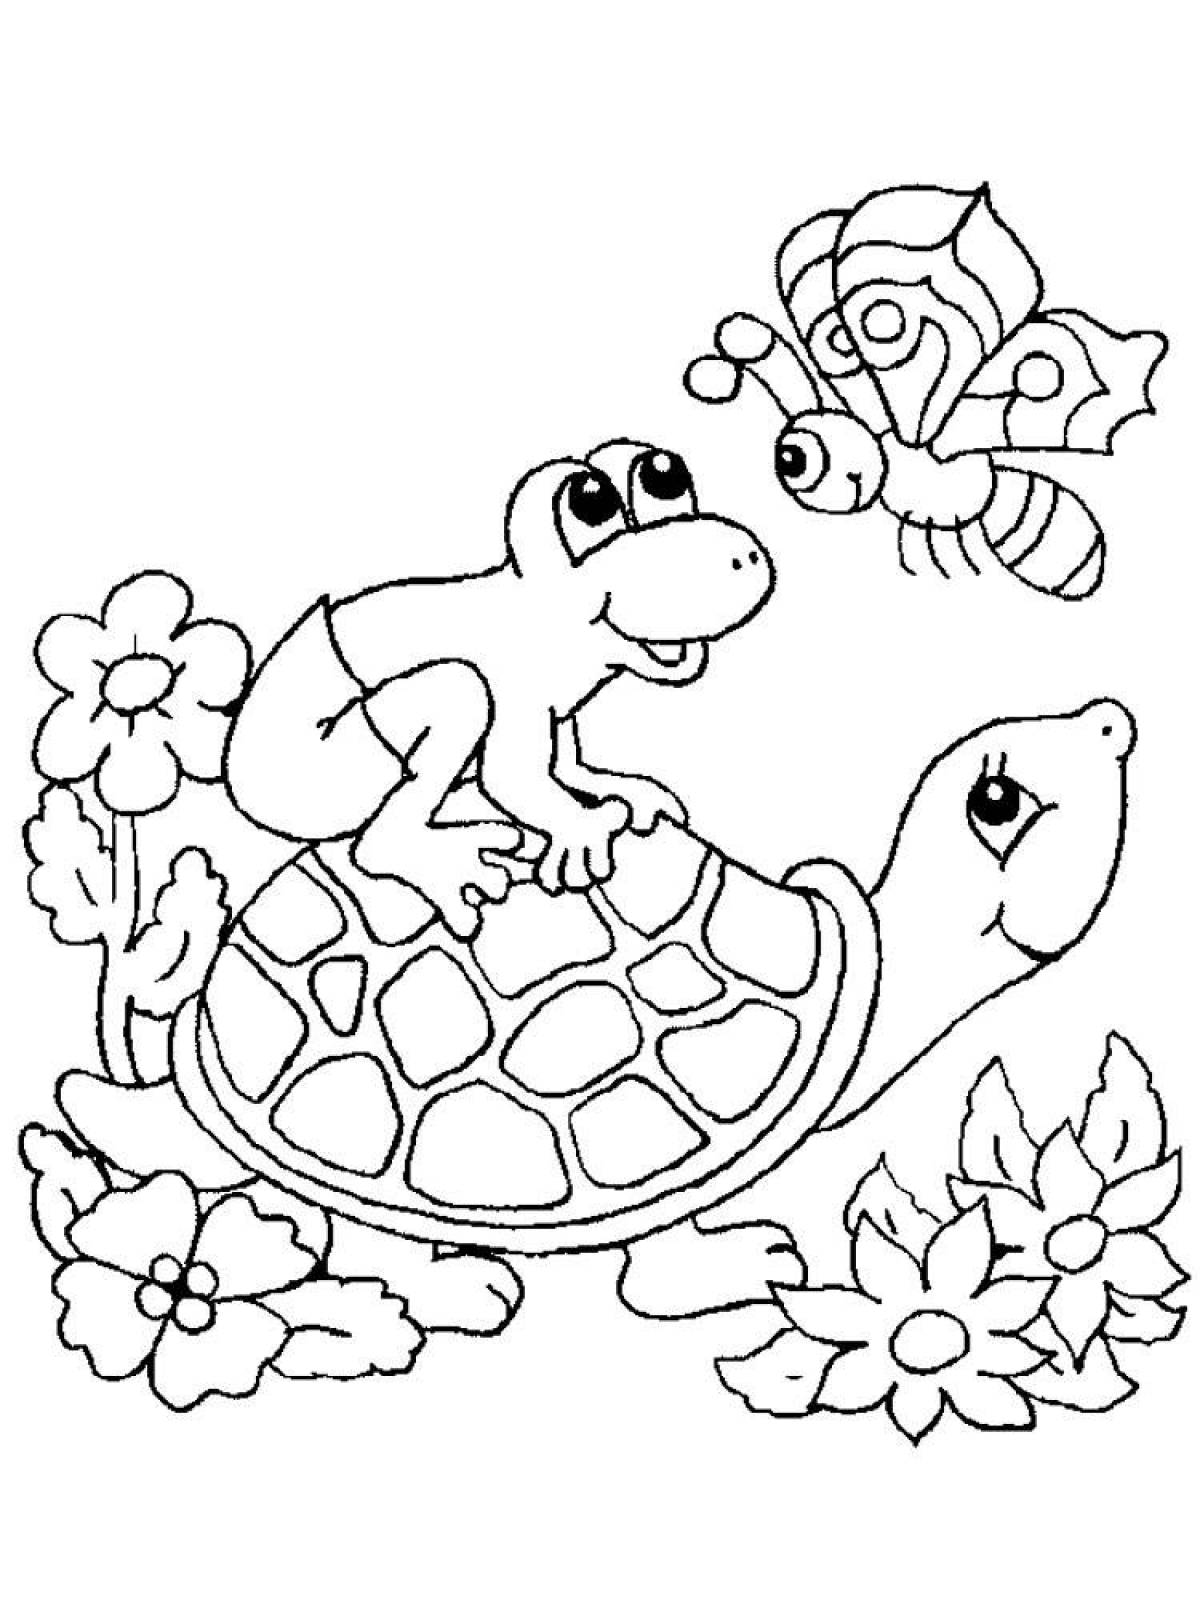 Fancy turtle coloring book